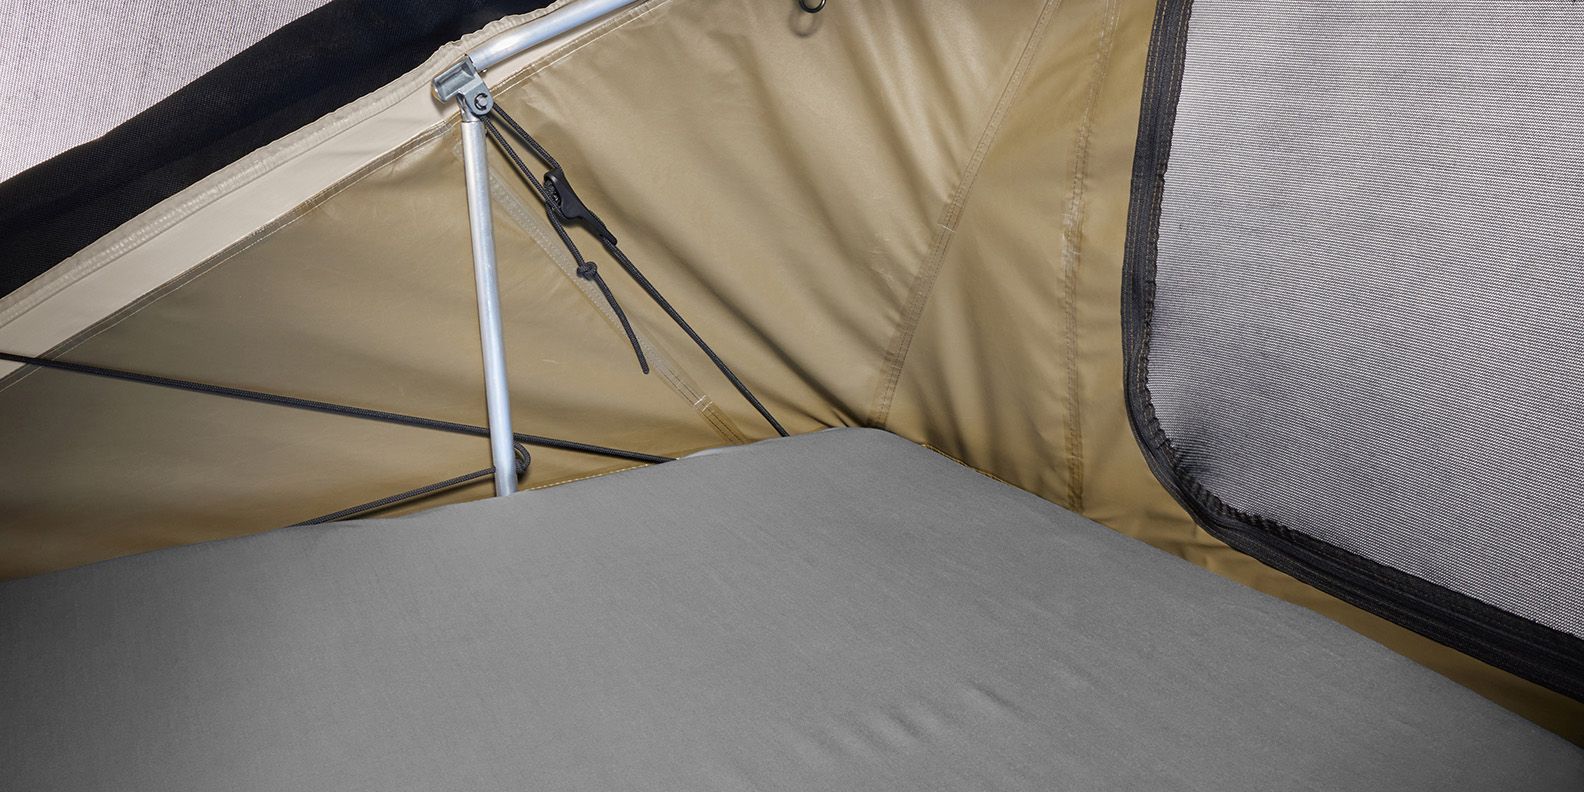 A close up of the sheets inside the Thule Approach rooftop tent.